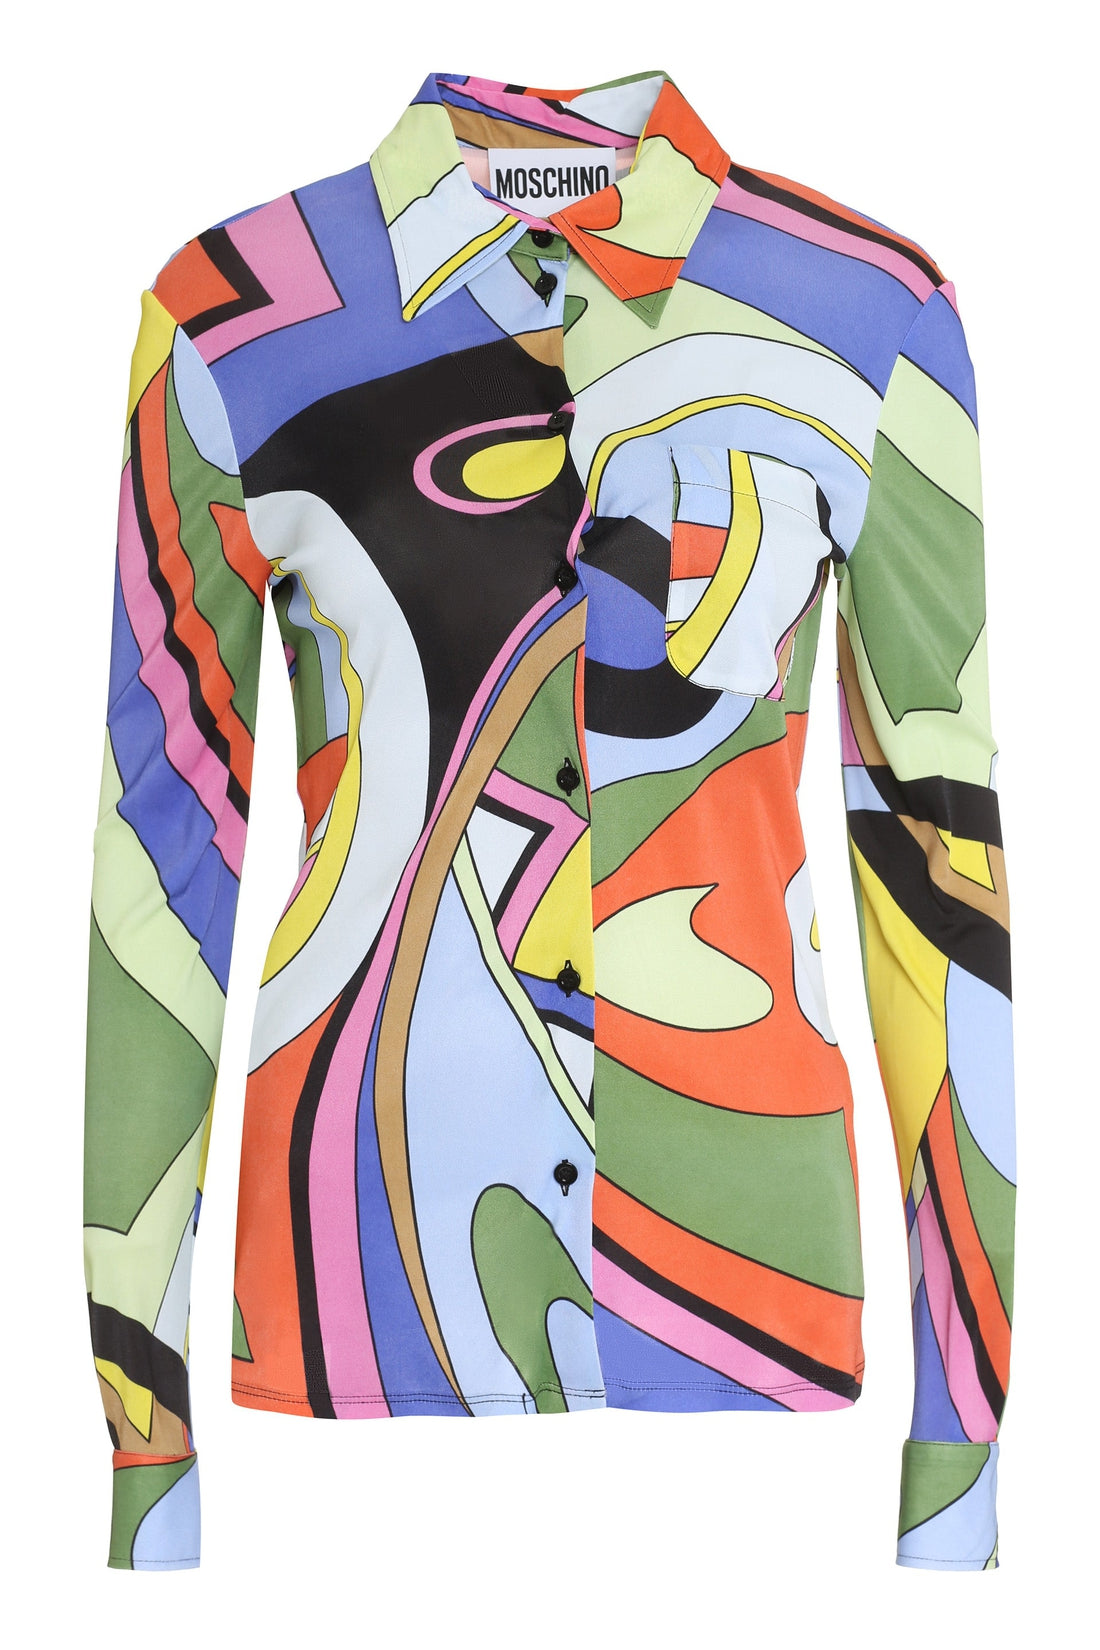 Moschino-OUTLET-SALE-Printed viscose shirt-ARCHIVIST